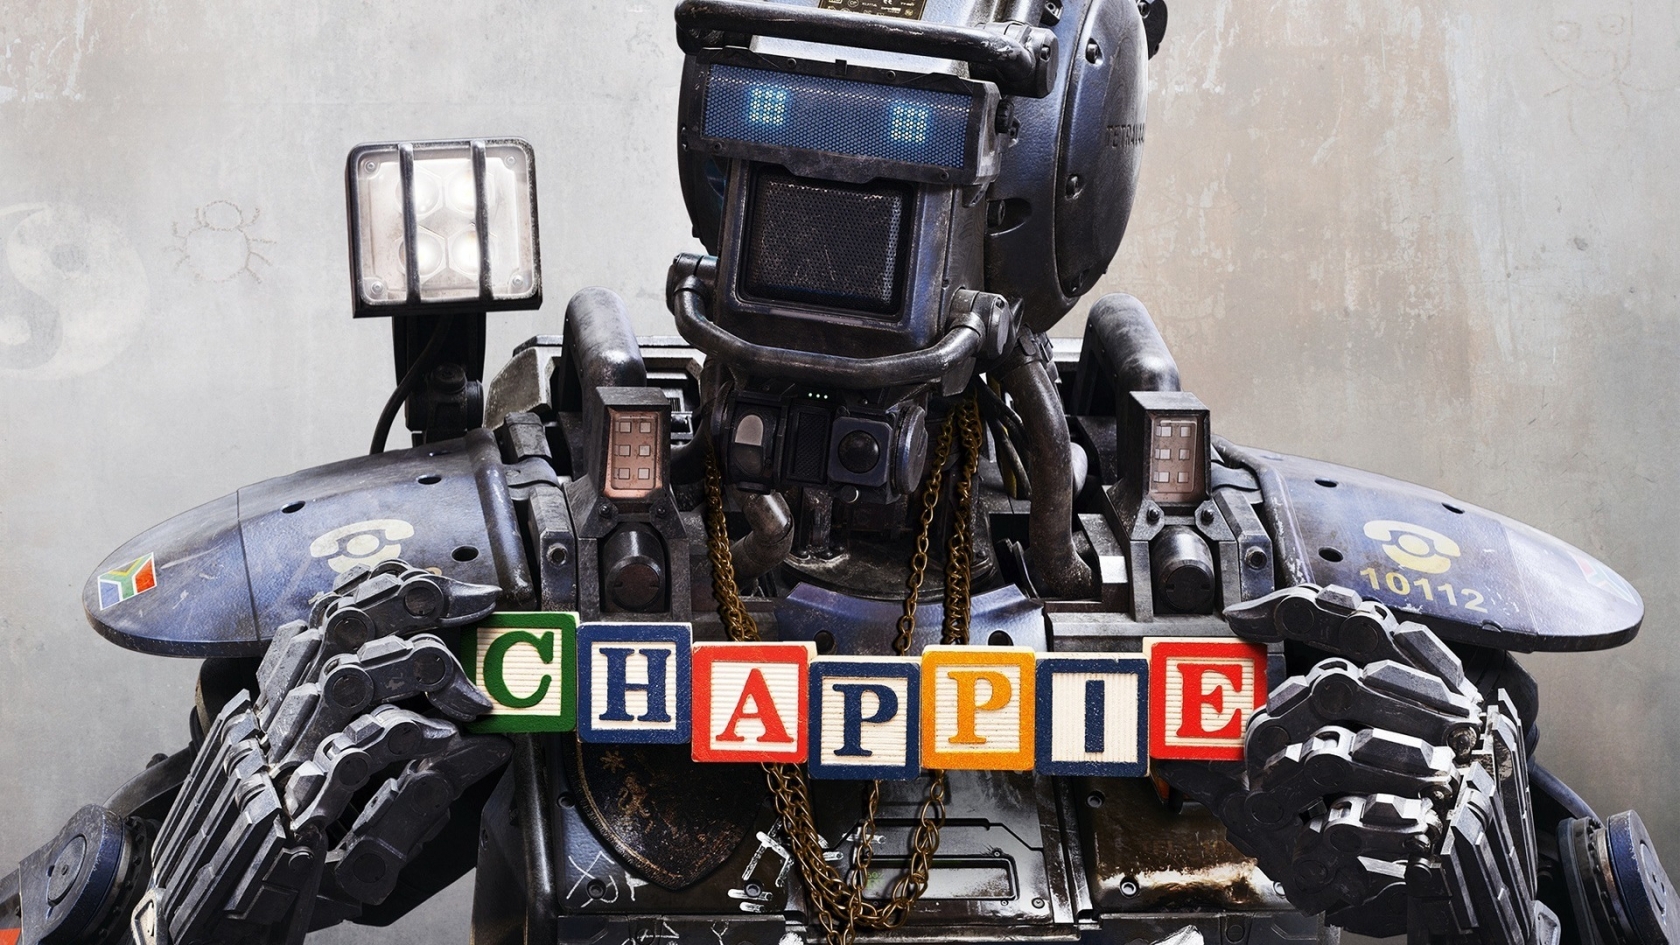 Chappie Robot for 1680 x 945 HDTV resolution